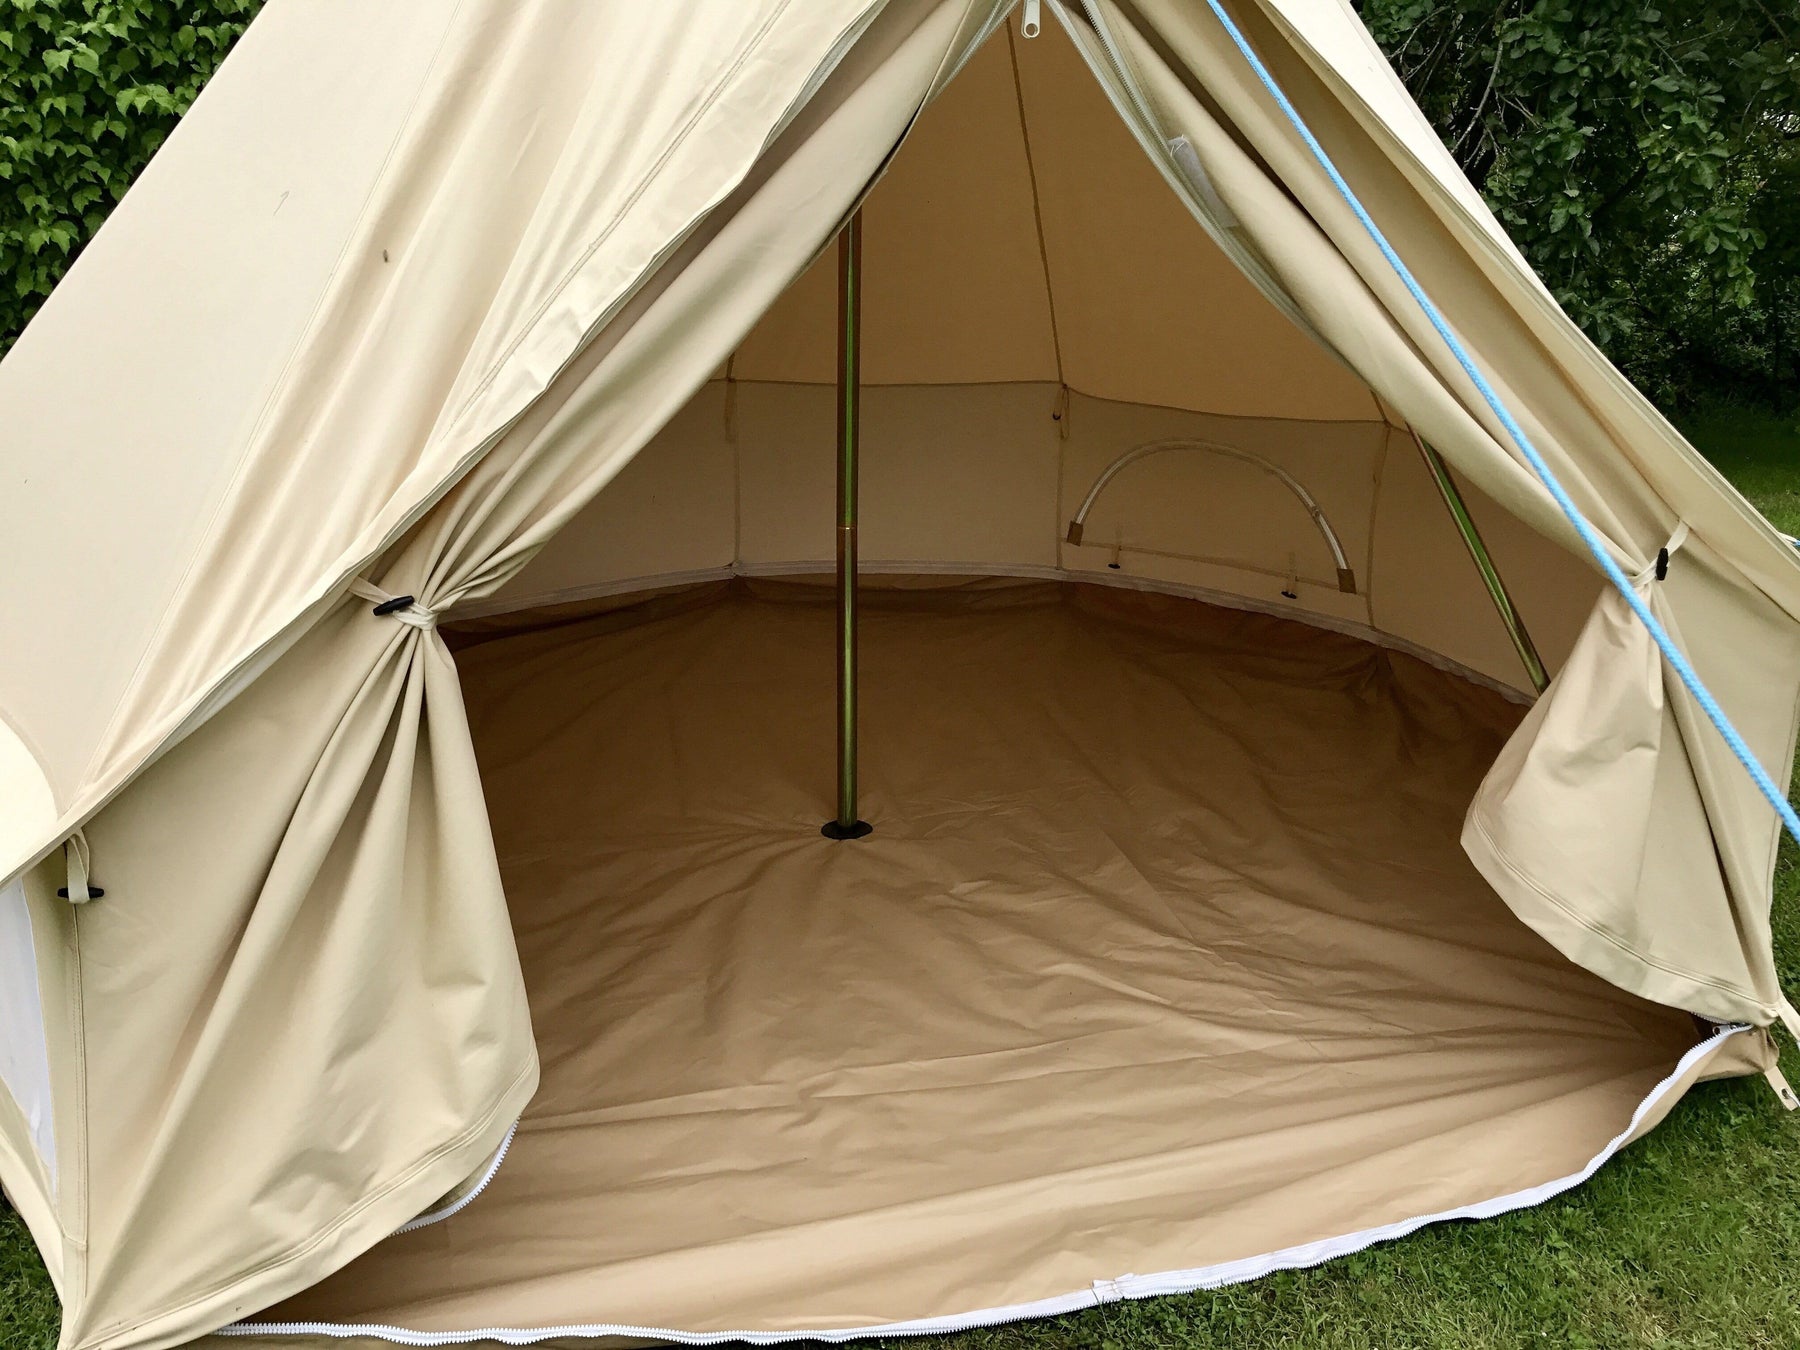 3m Bell Tent